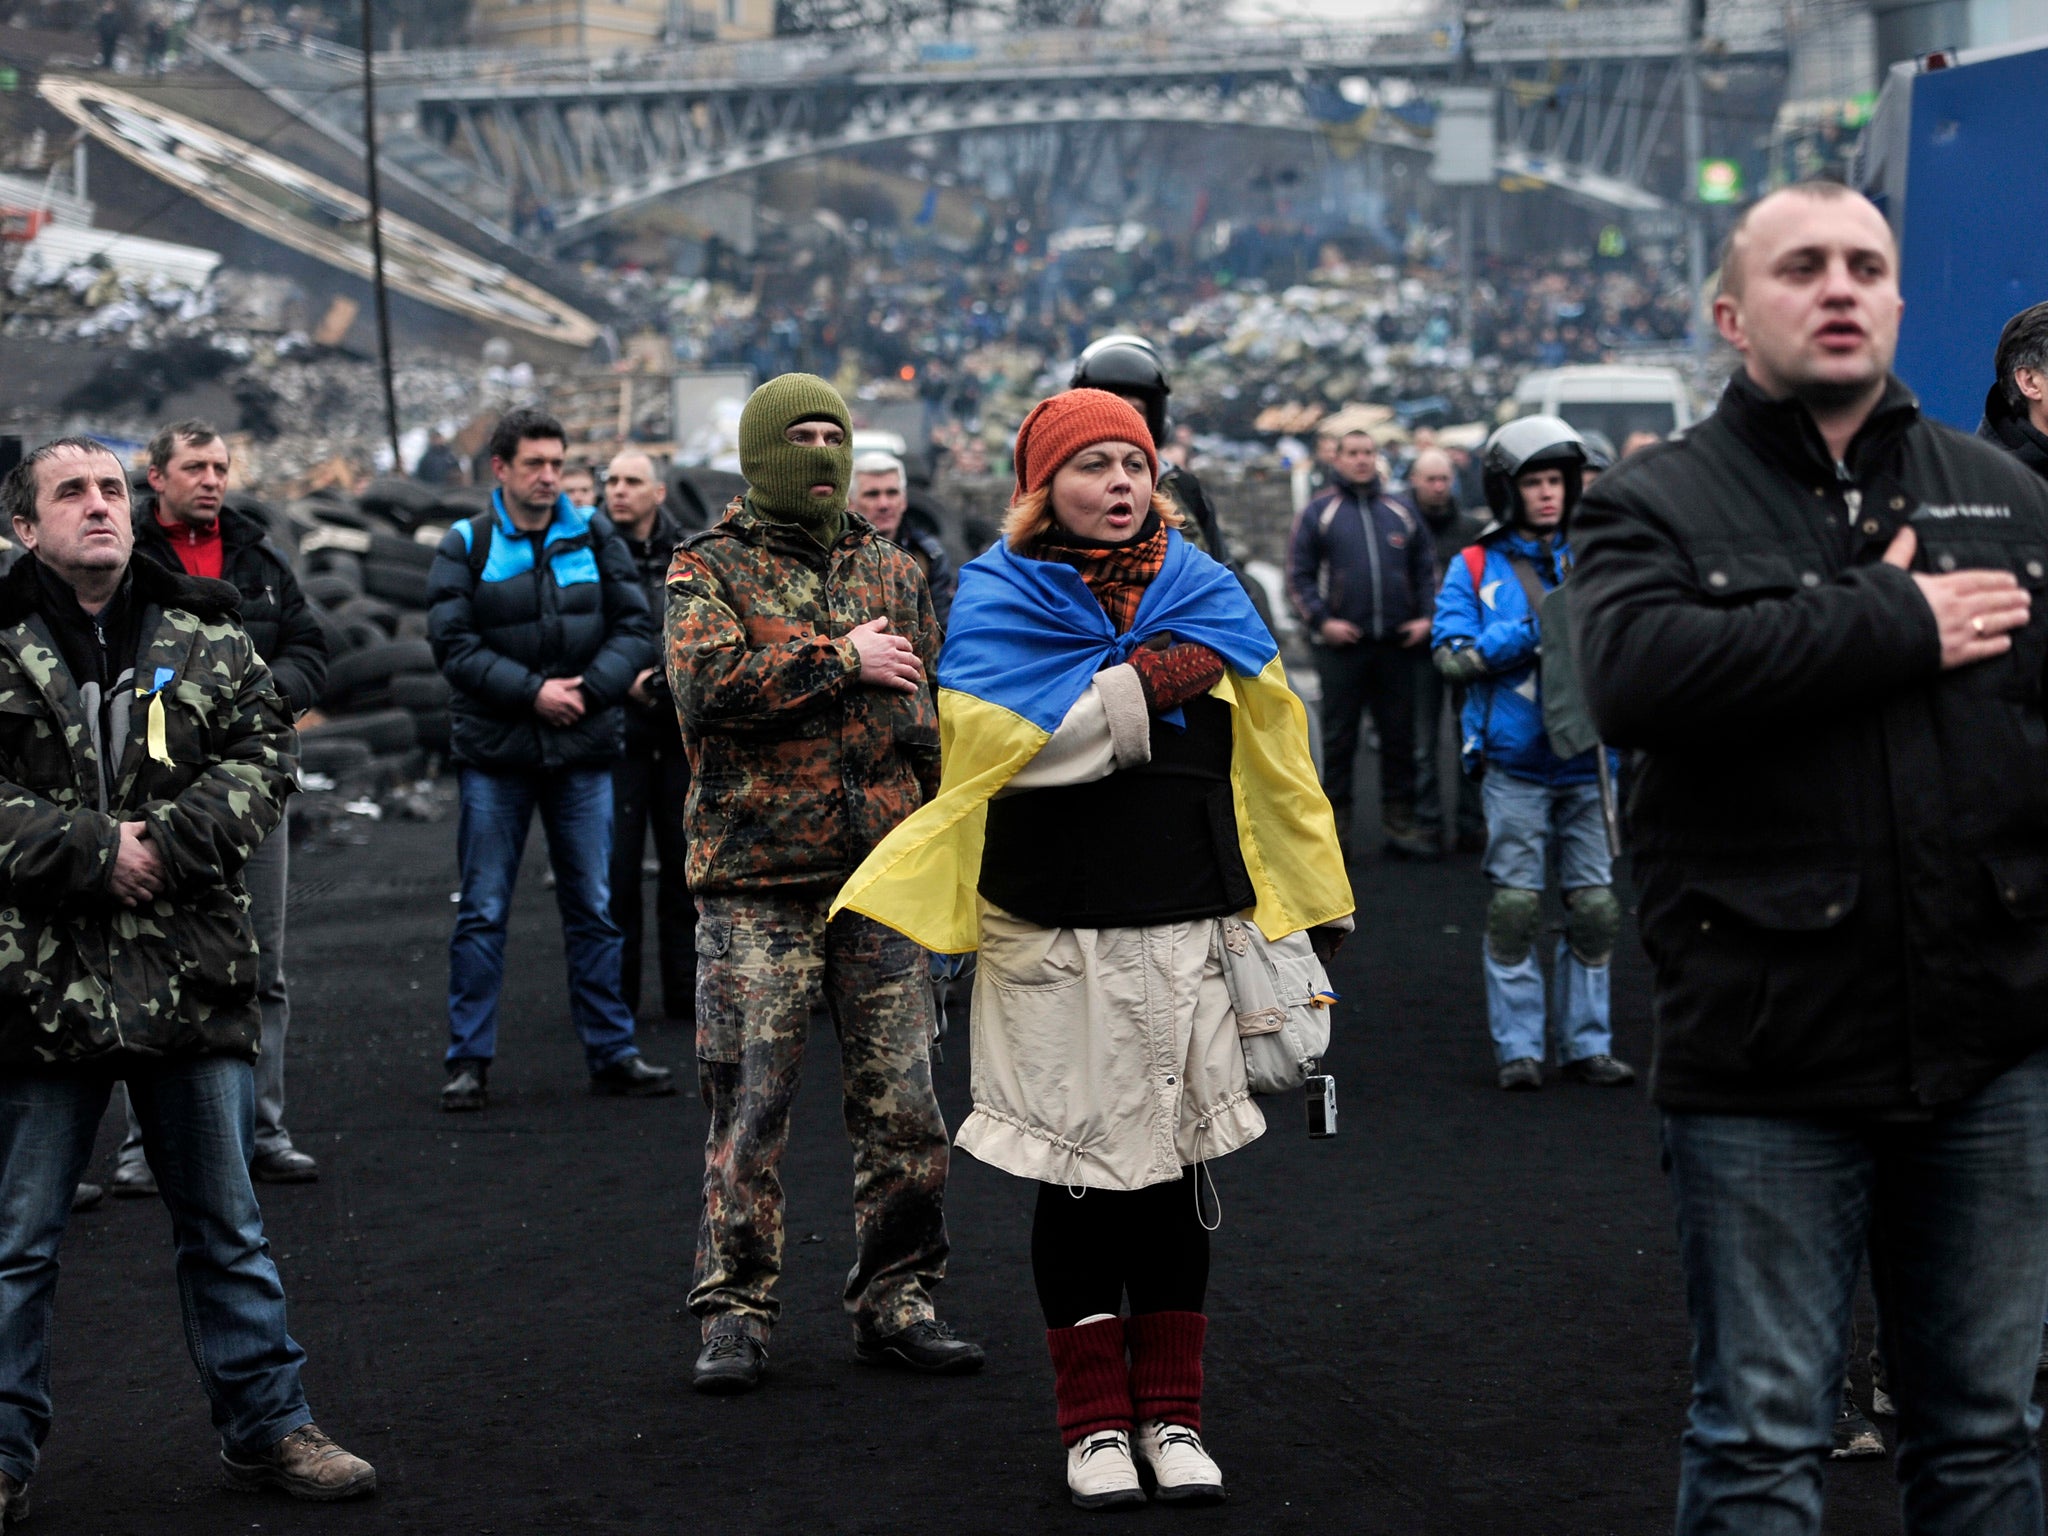 Protesters in Kiev, Ukraine: Corrupt regimes provoke unrest and create areas of instability